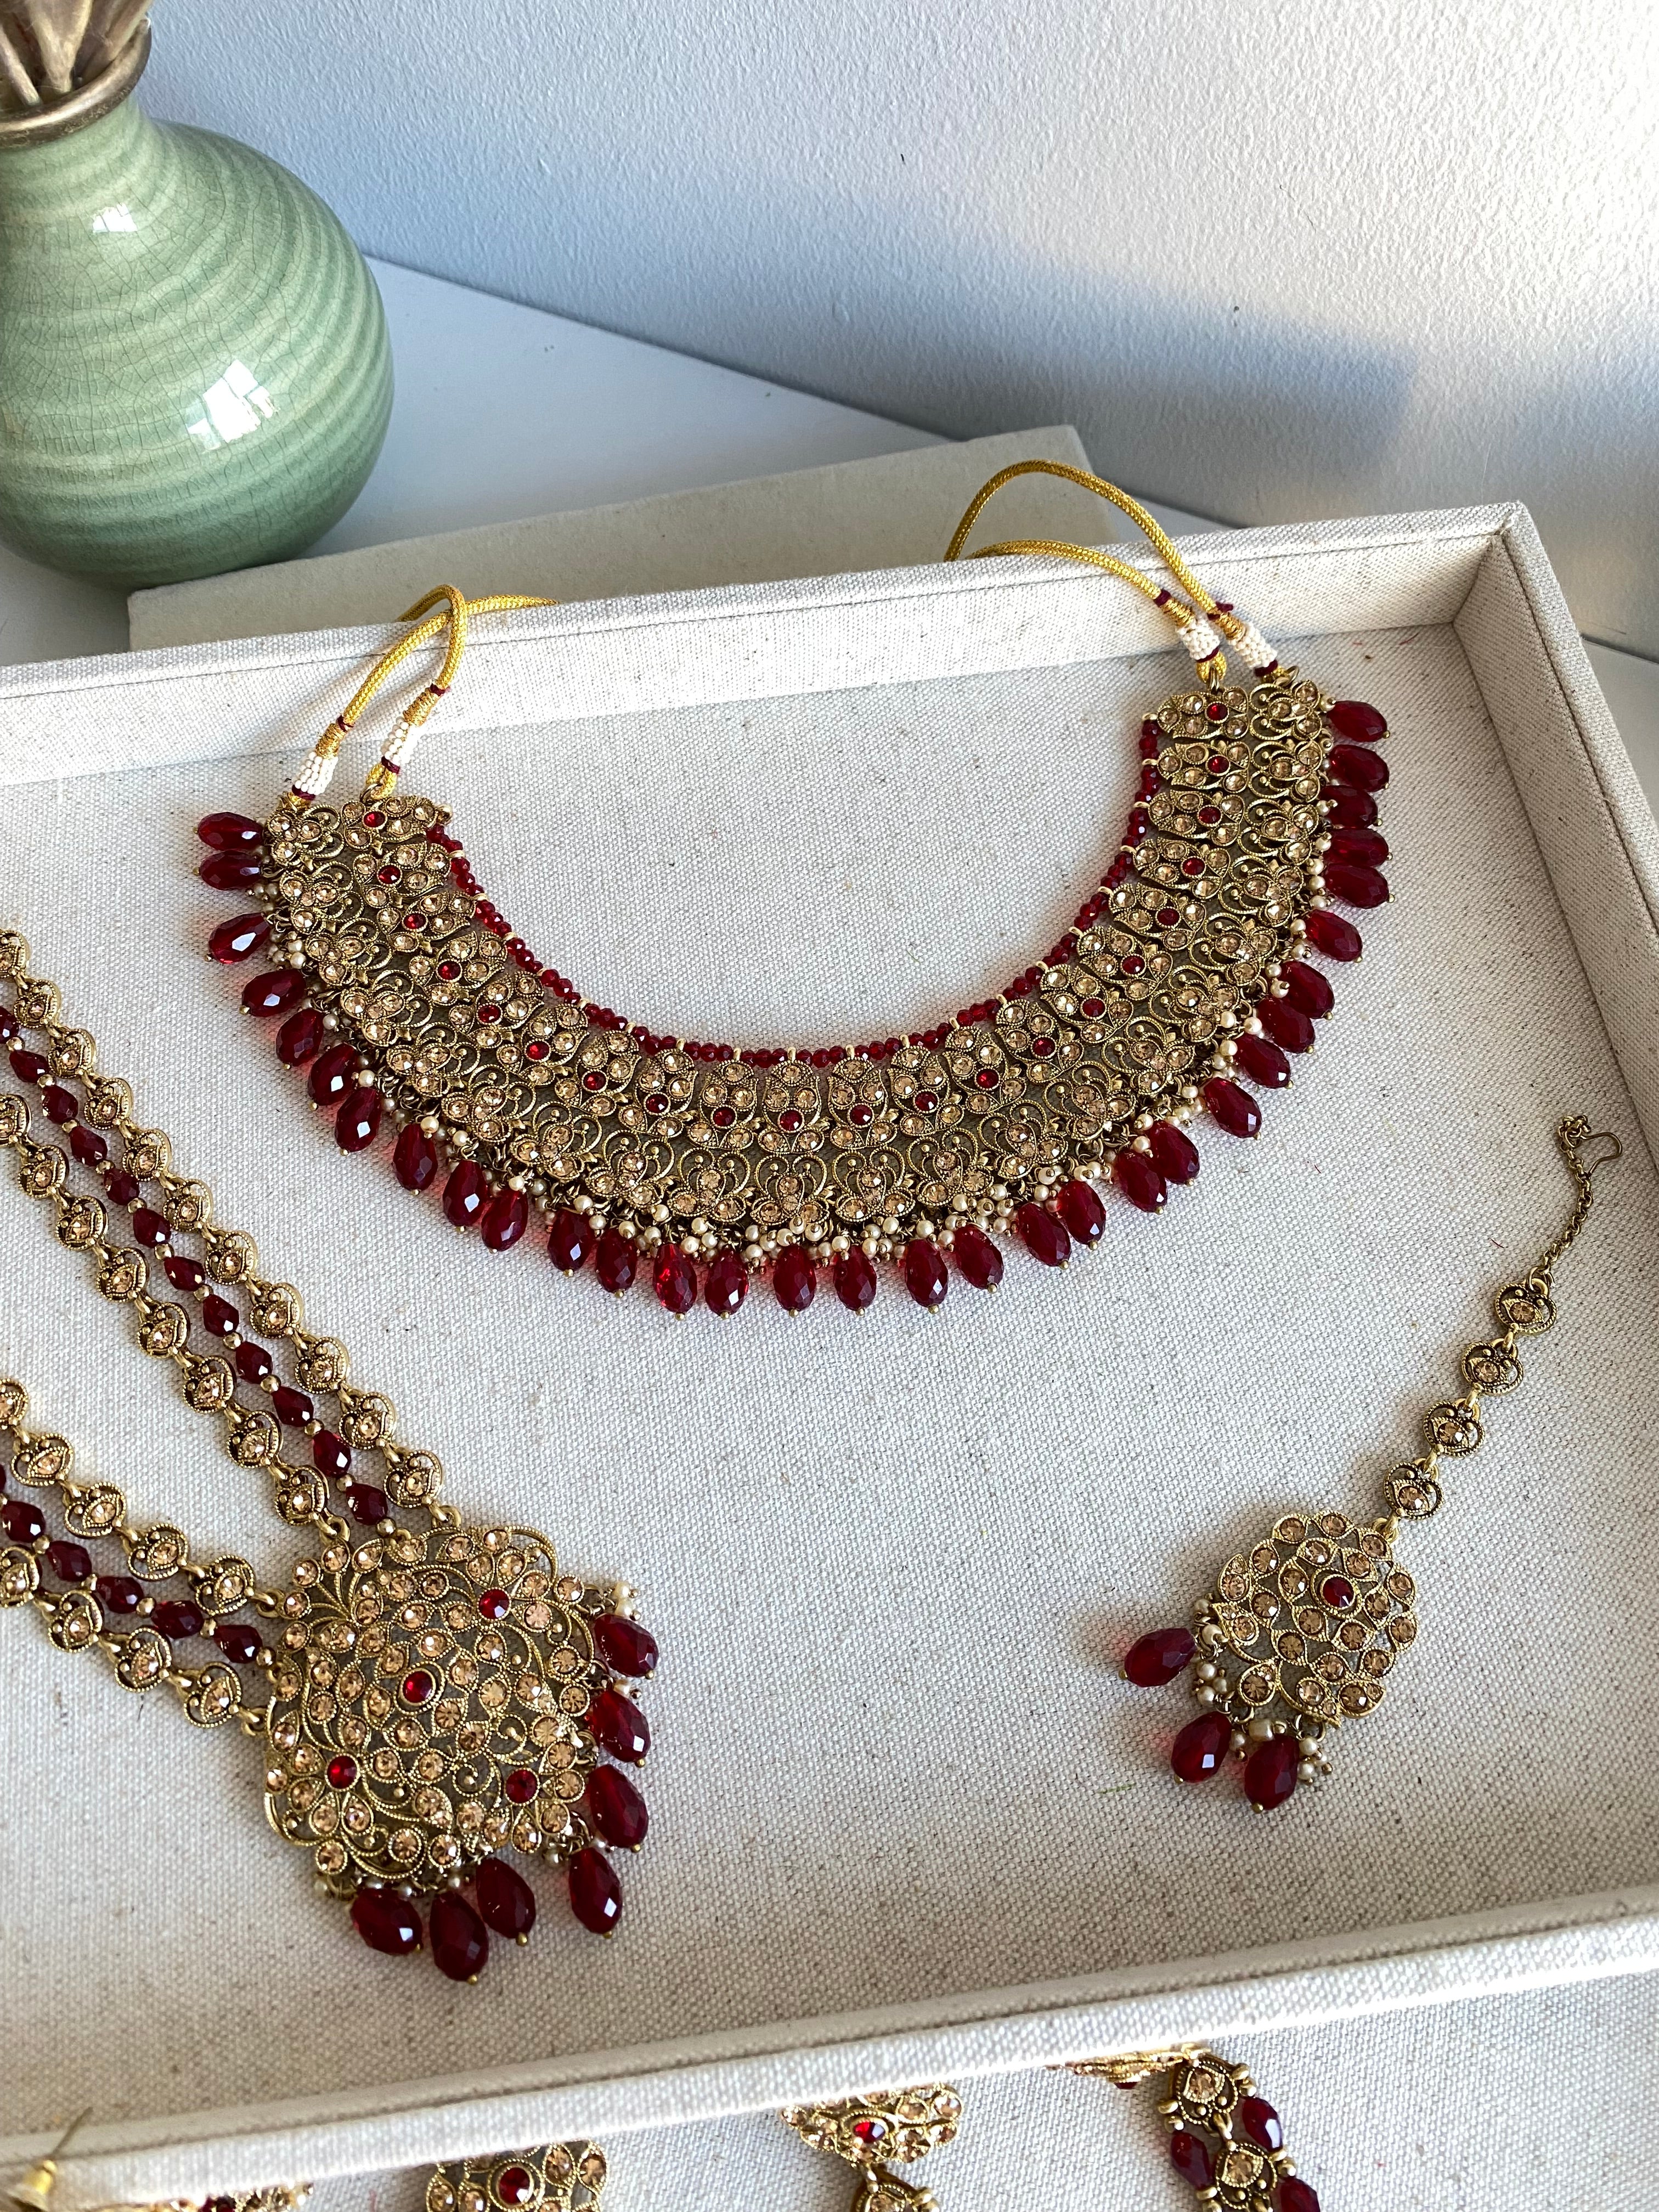 Festive Essentials - Introduces the Amira Bridal Necklace, a stunning piece with an antique gold or silver base and exquisite Polki stones adorned with captivating color beads. Don't see the color you like? Contact us on whatsapp at +1(313)727.1045 for custom options.